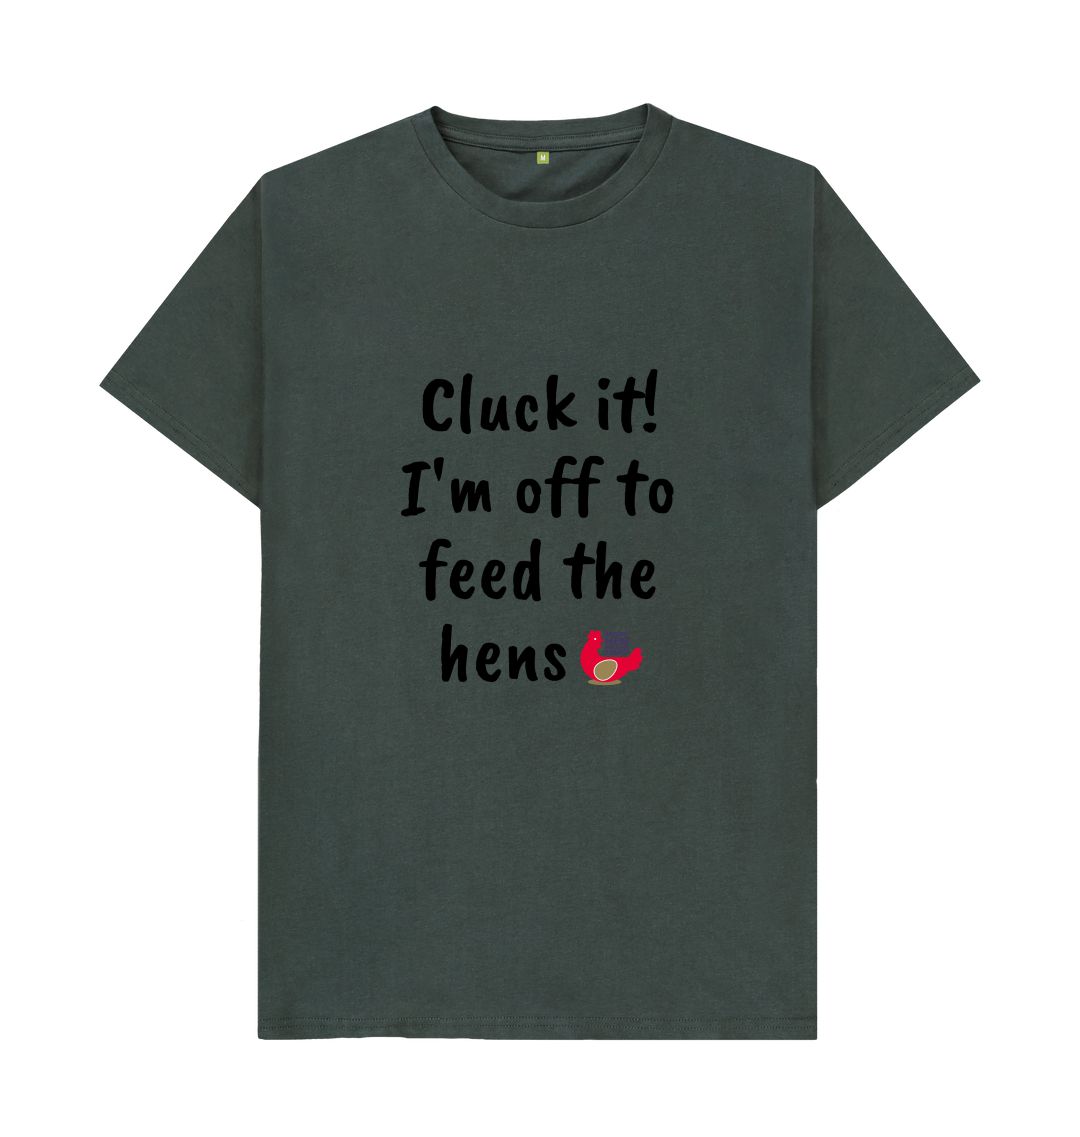 Dark Grey Cluck it! I'm off to feed the hens Unisex T-shirt